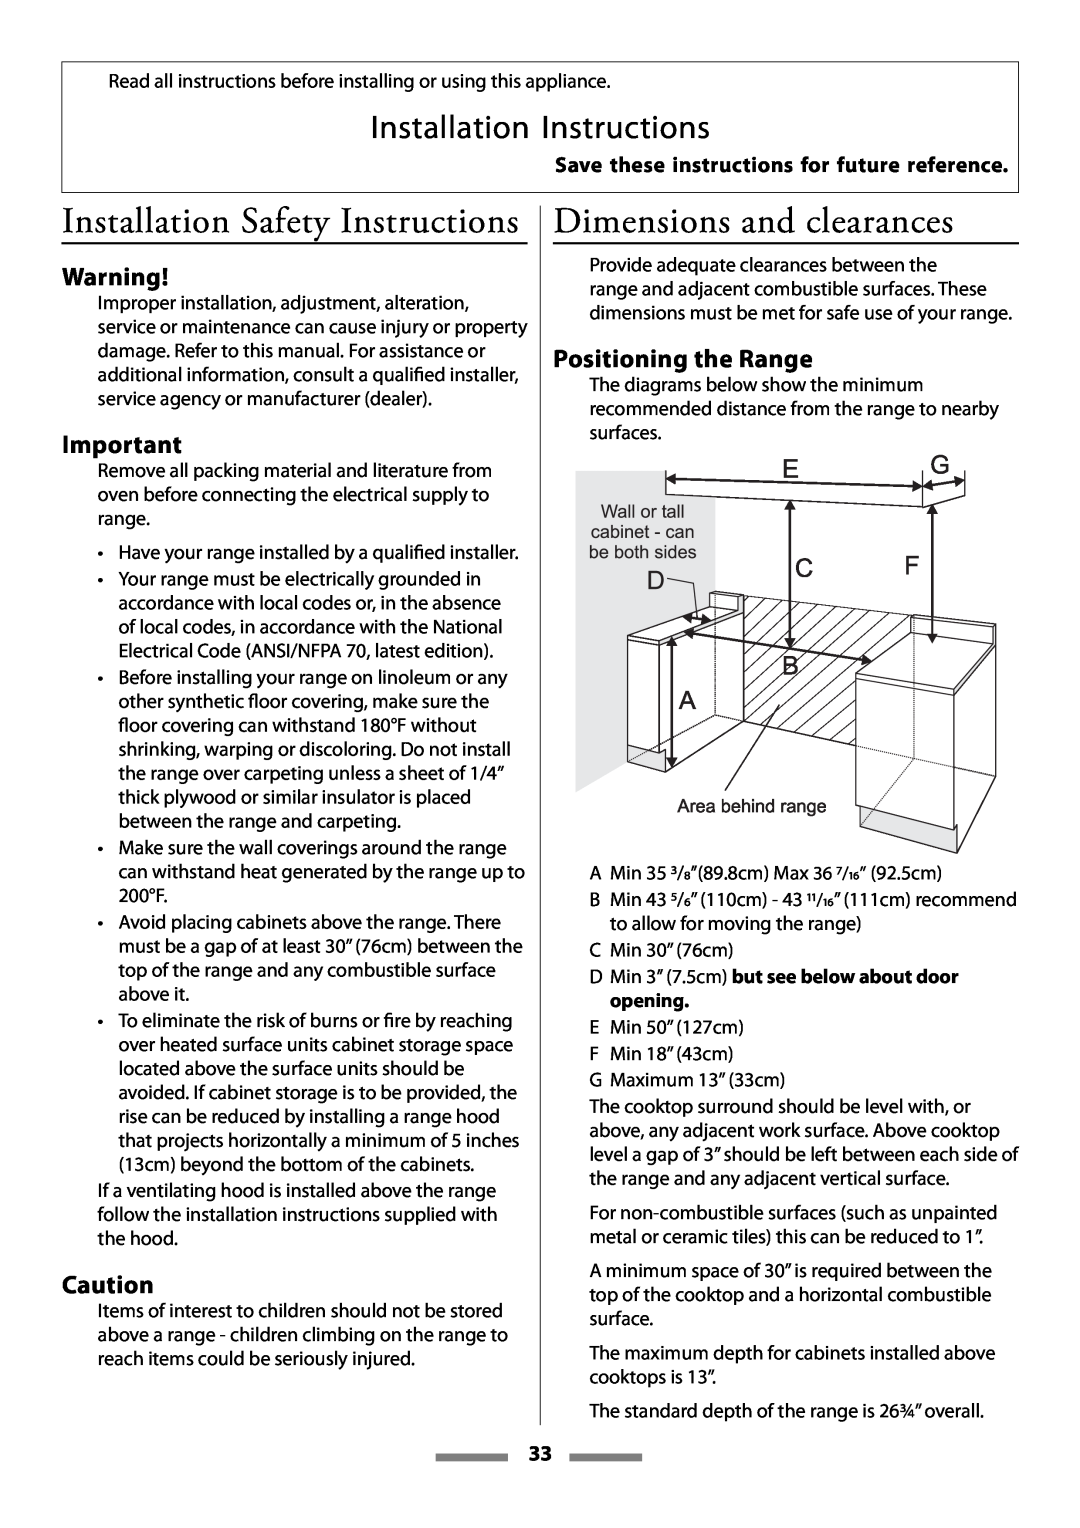 Aga Ranges Legacy 44 Installation Safety Instructions, Dimensions and clearances, Positioning the Range 